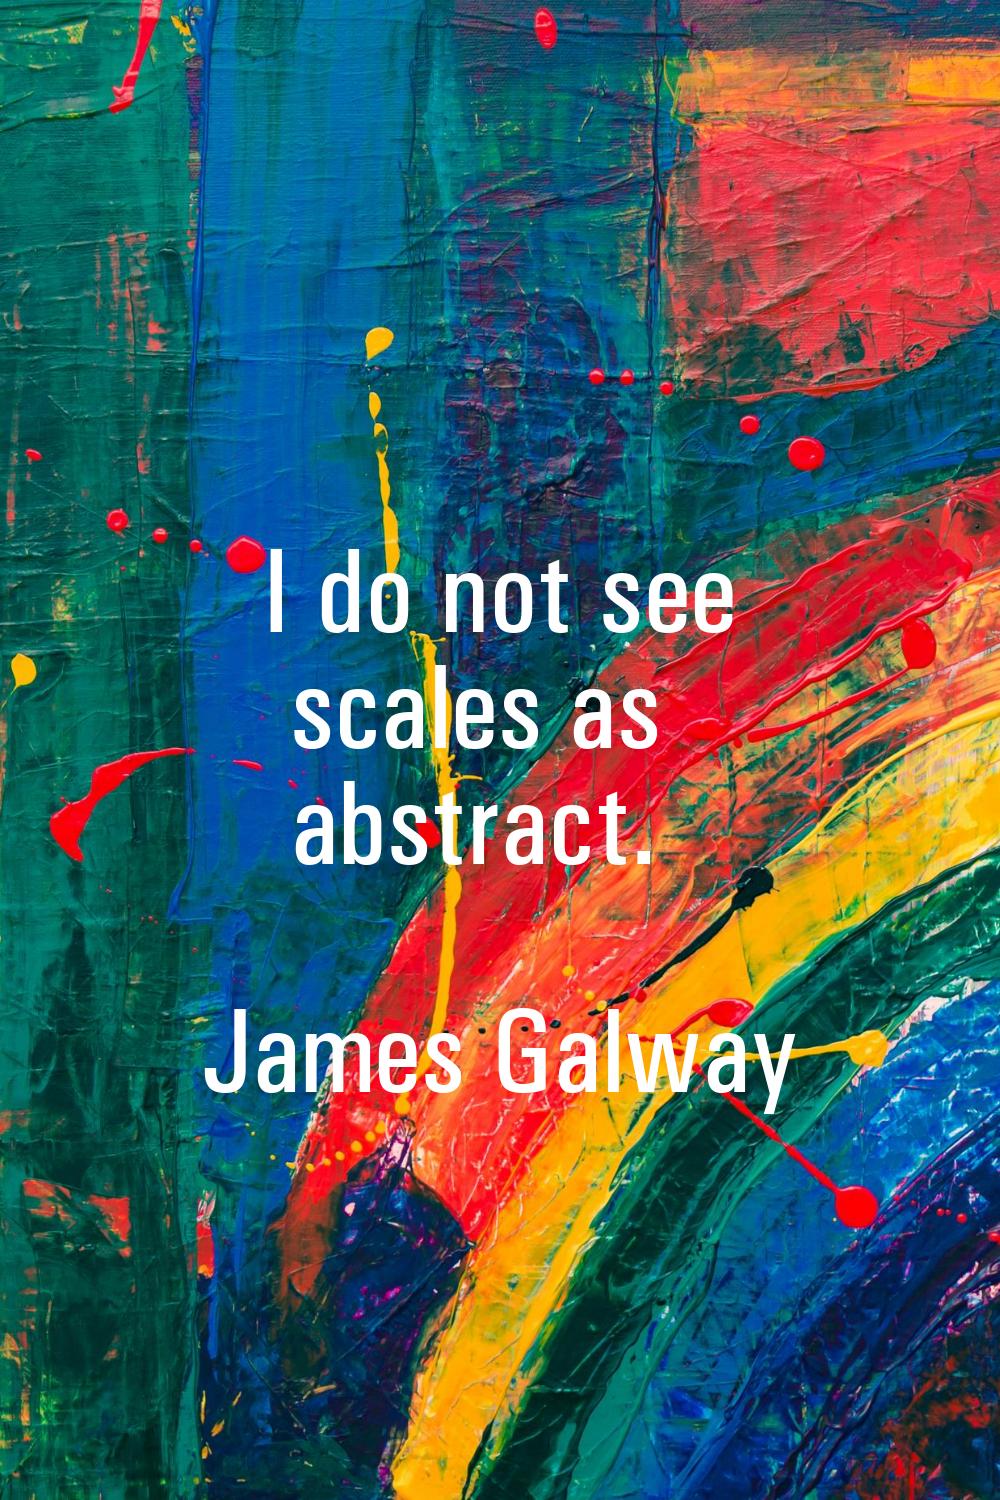 I do not see scales as abstract.